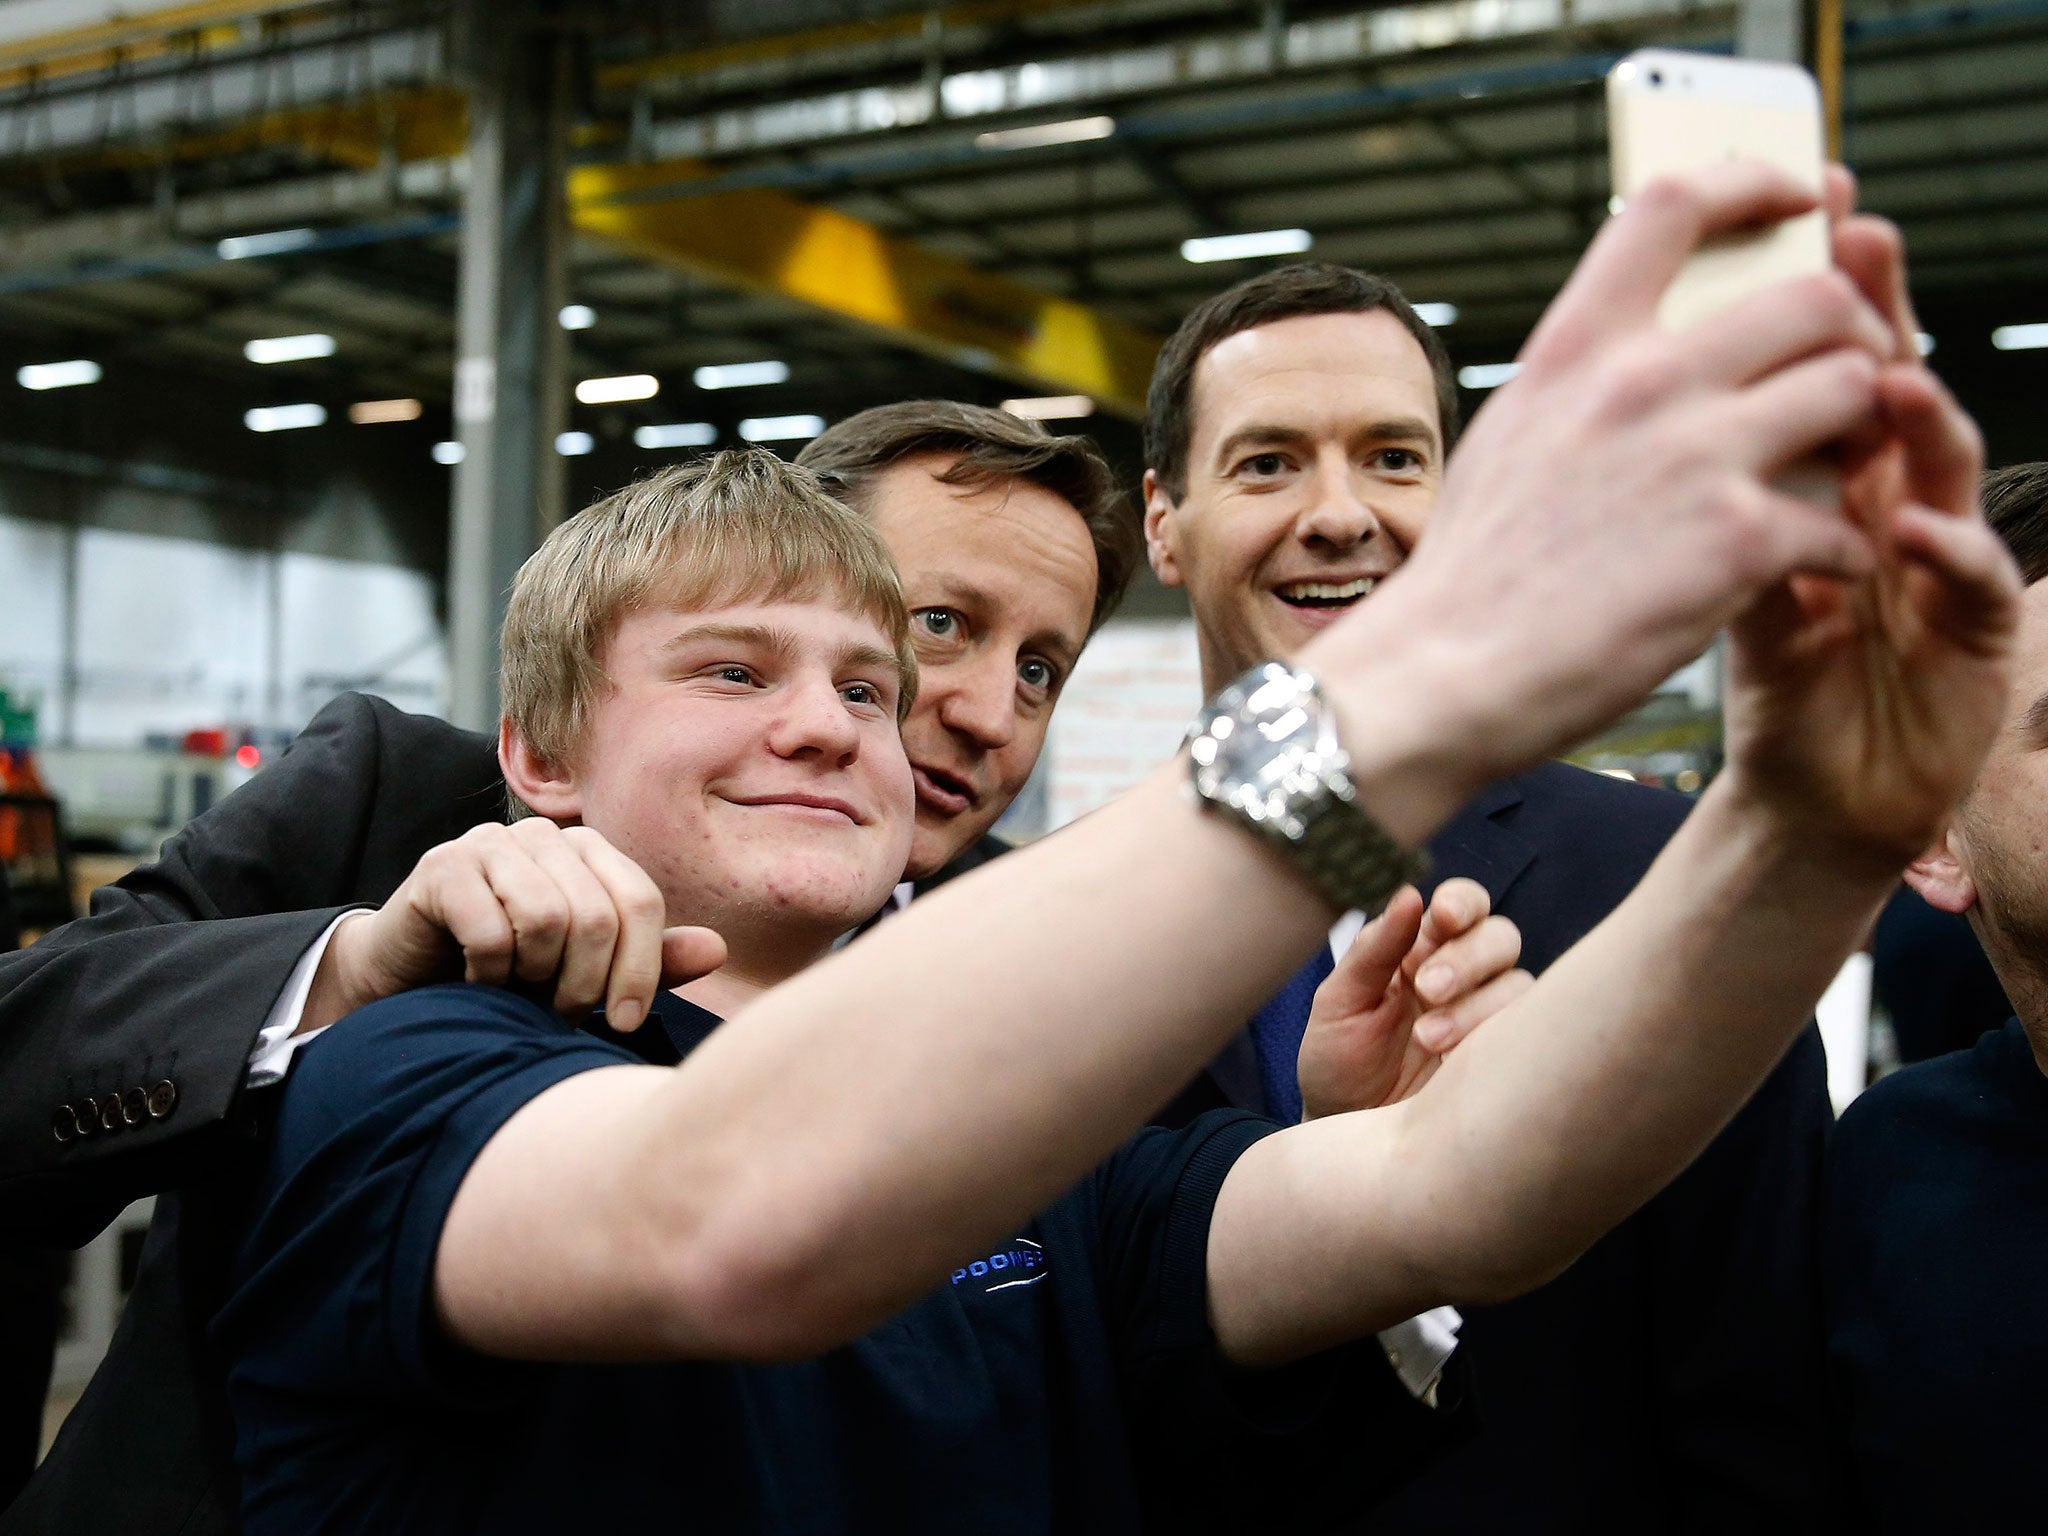 Prime Minister David Cameron and Chancellor of the Exchequer George Osborne pose for a selfie photograph with an apprentice